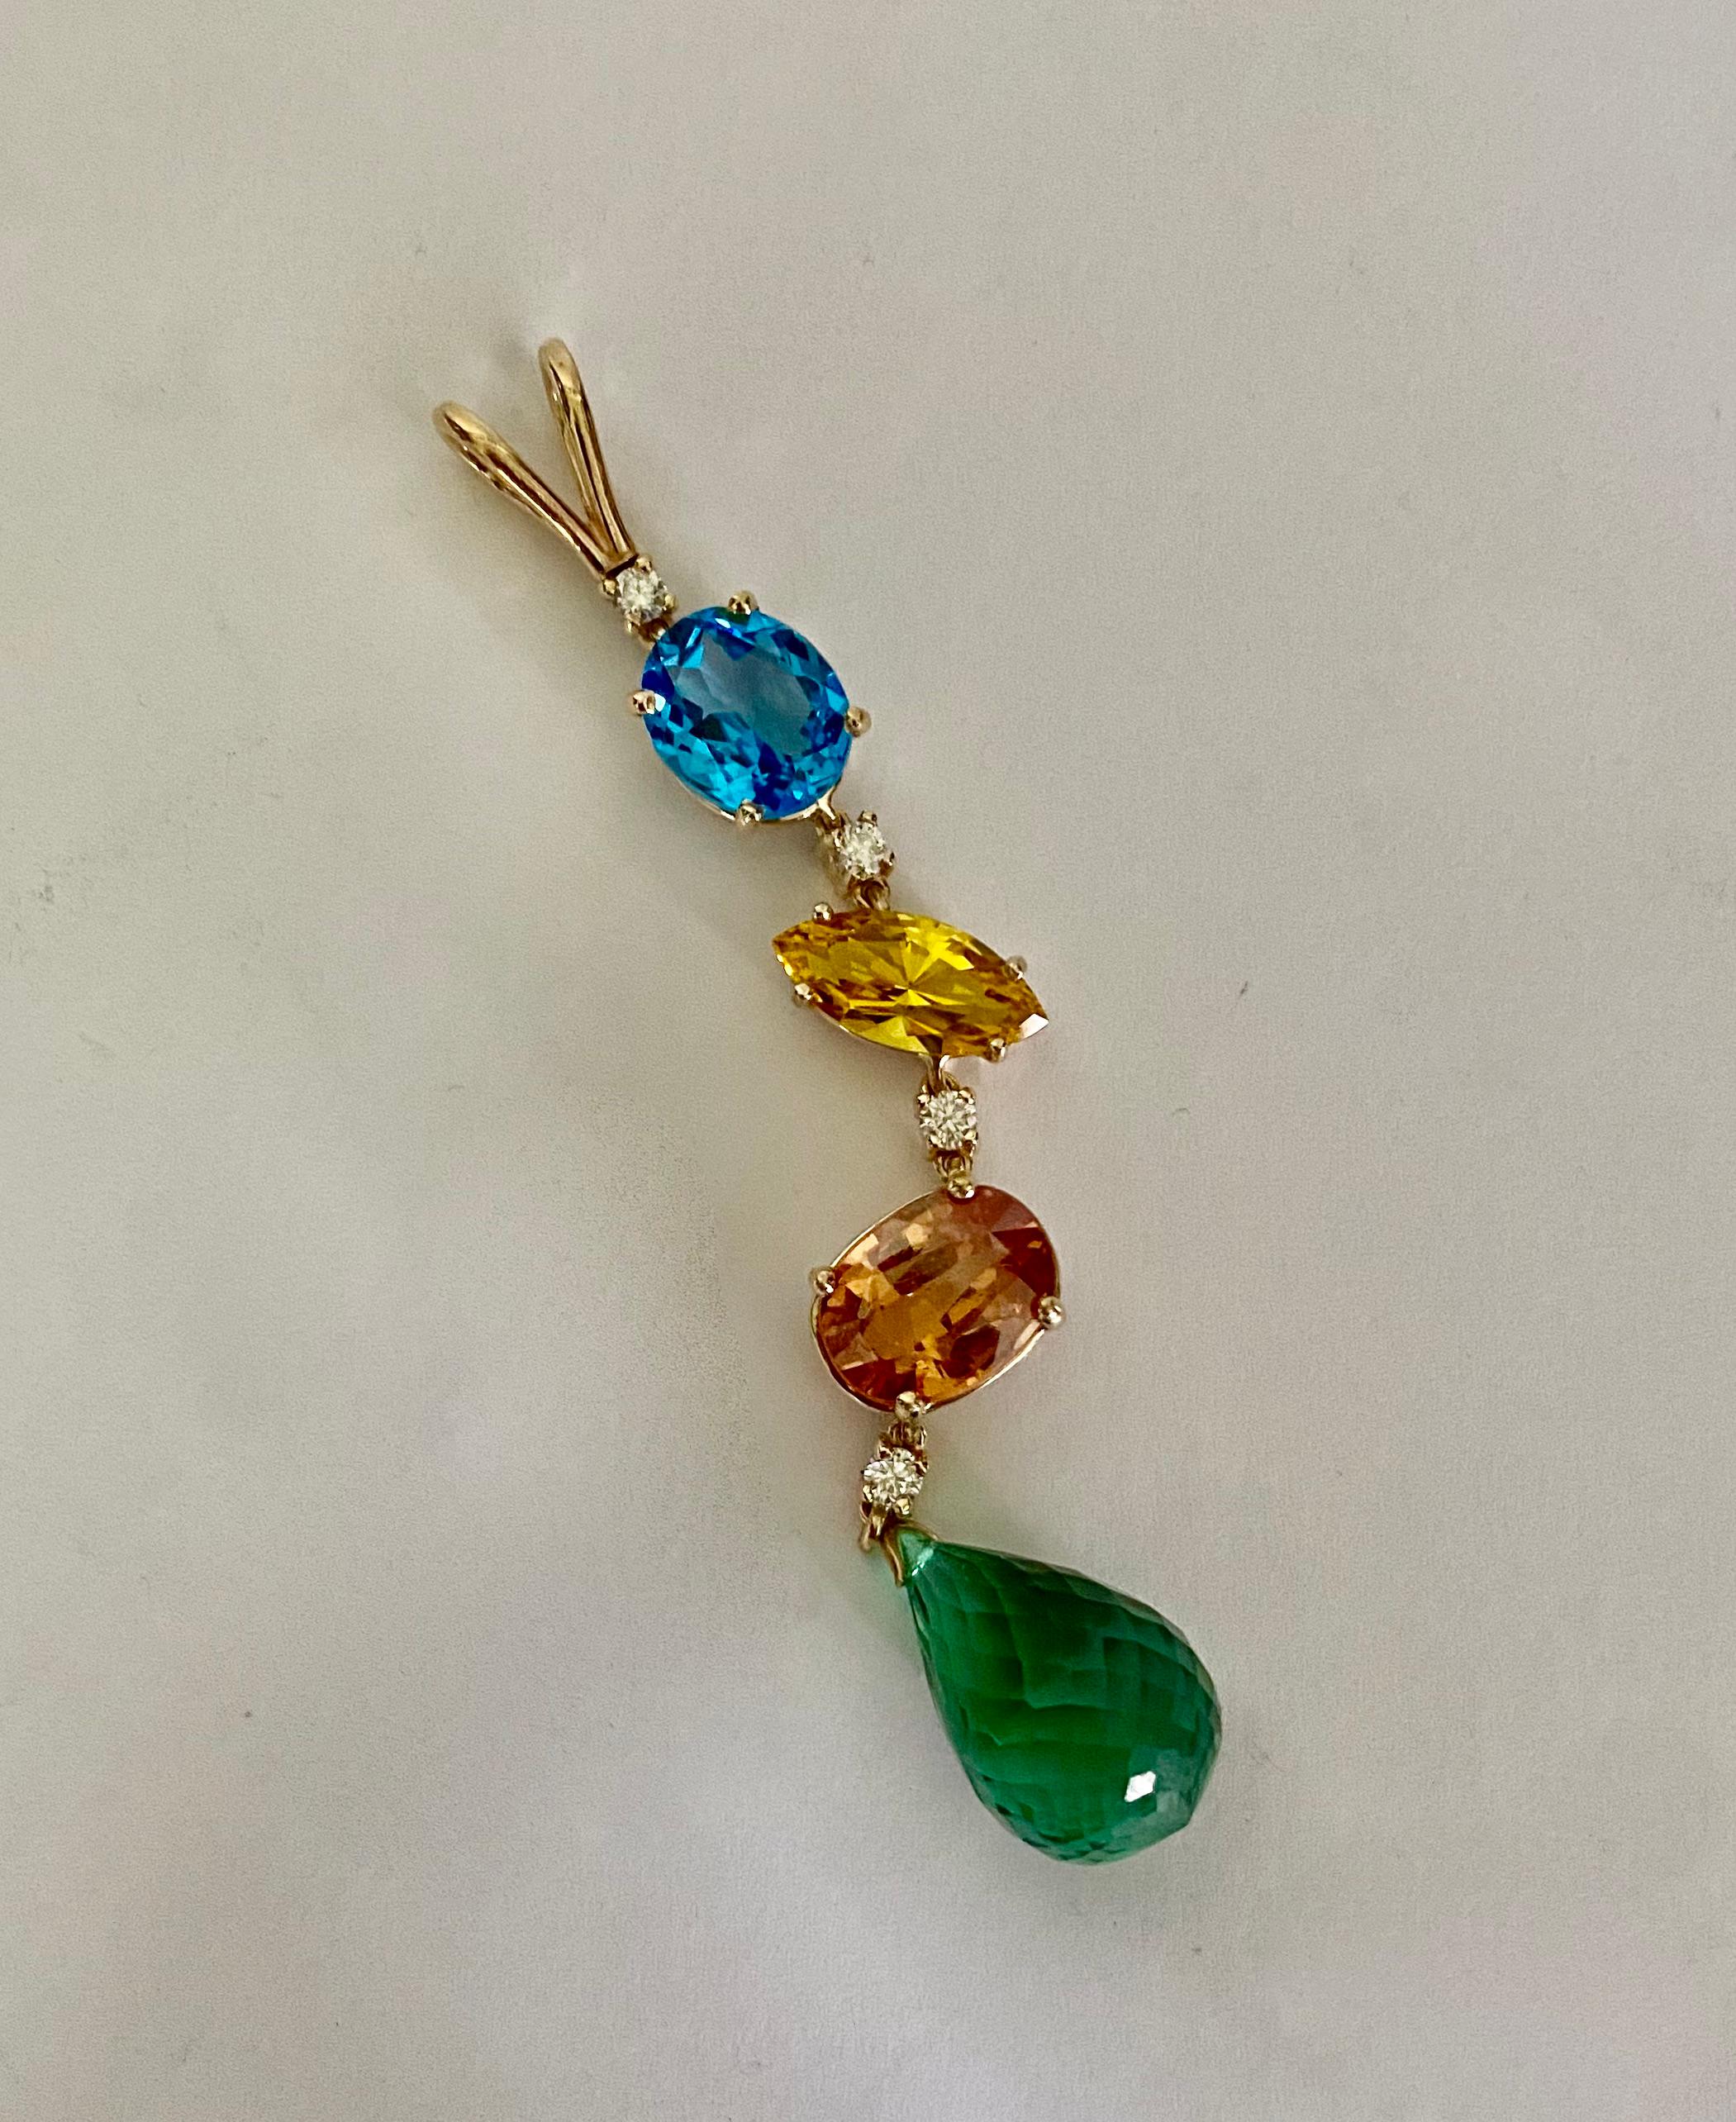 A melange of gemstones forms this dramatic Stiletto pendant.  Swiss blue topaz, citrine and orange topaz in a variety of shapes are spaced with white diamonds.  All the gems originate from Brazil.  They are all well cut and polished.  The